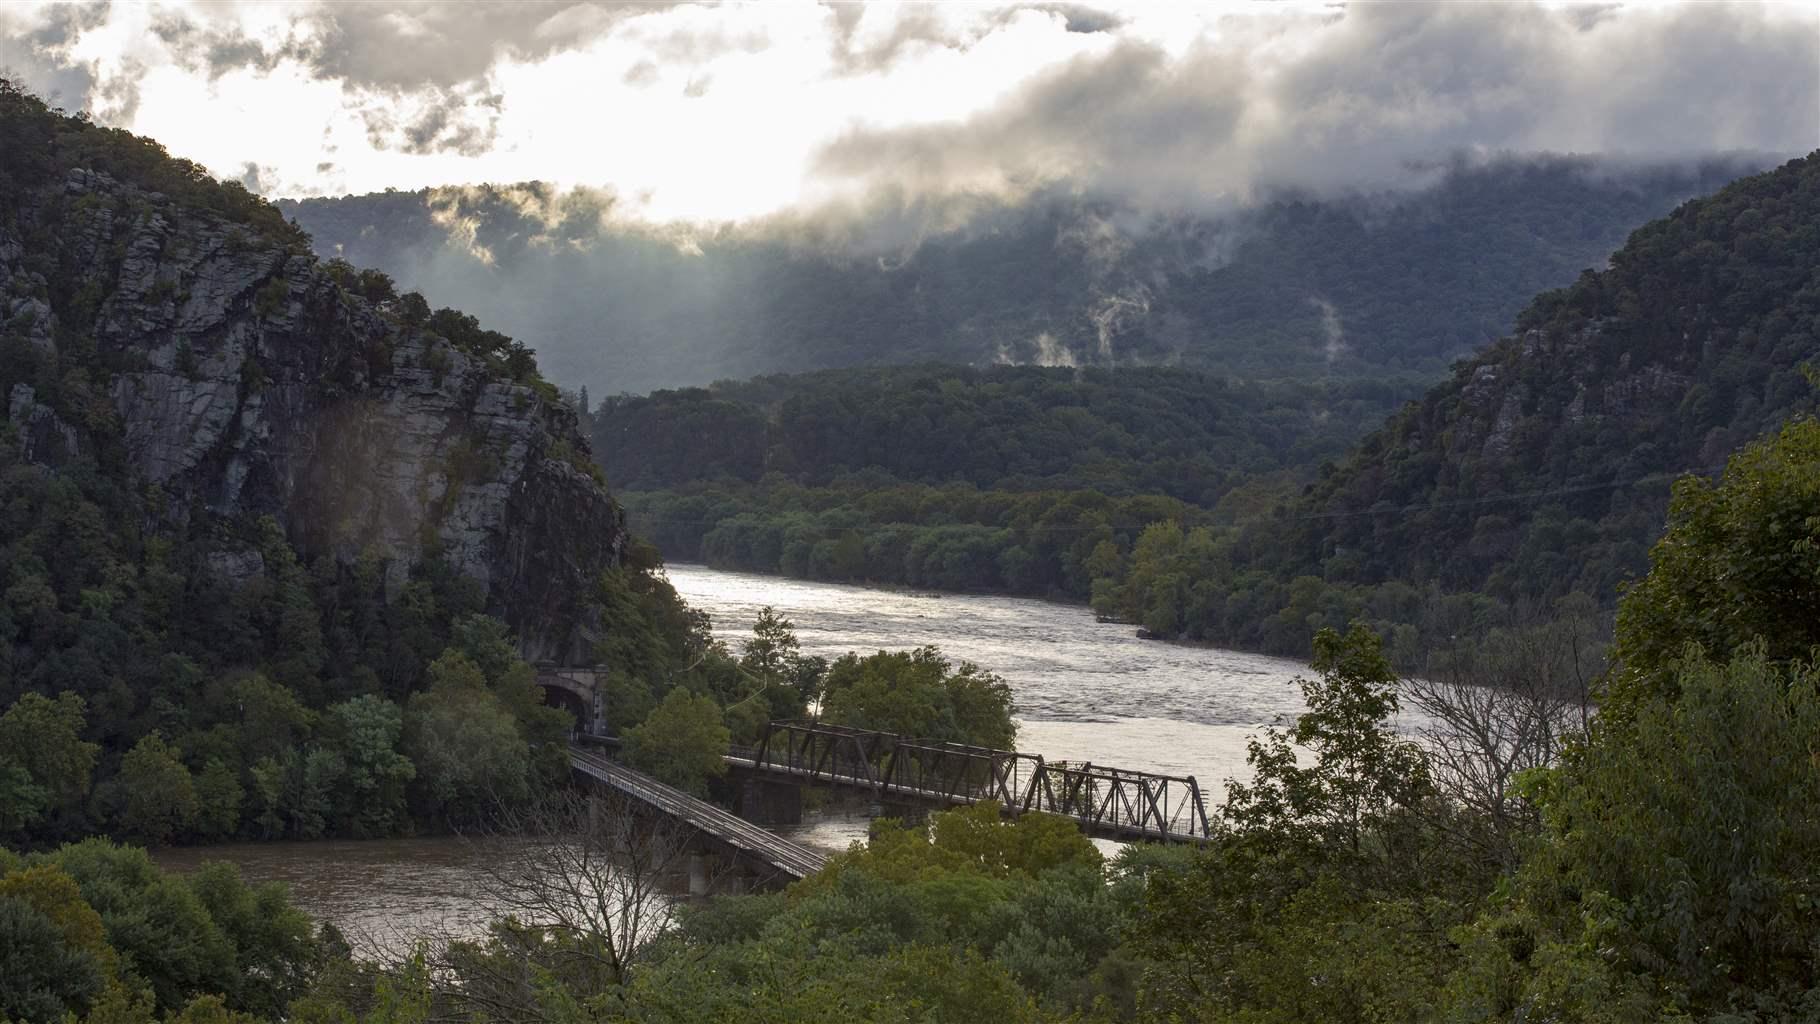 Bills in Congress Could Preserve Sites at Historic Harpers Ferry